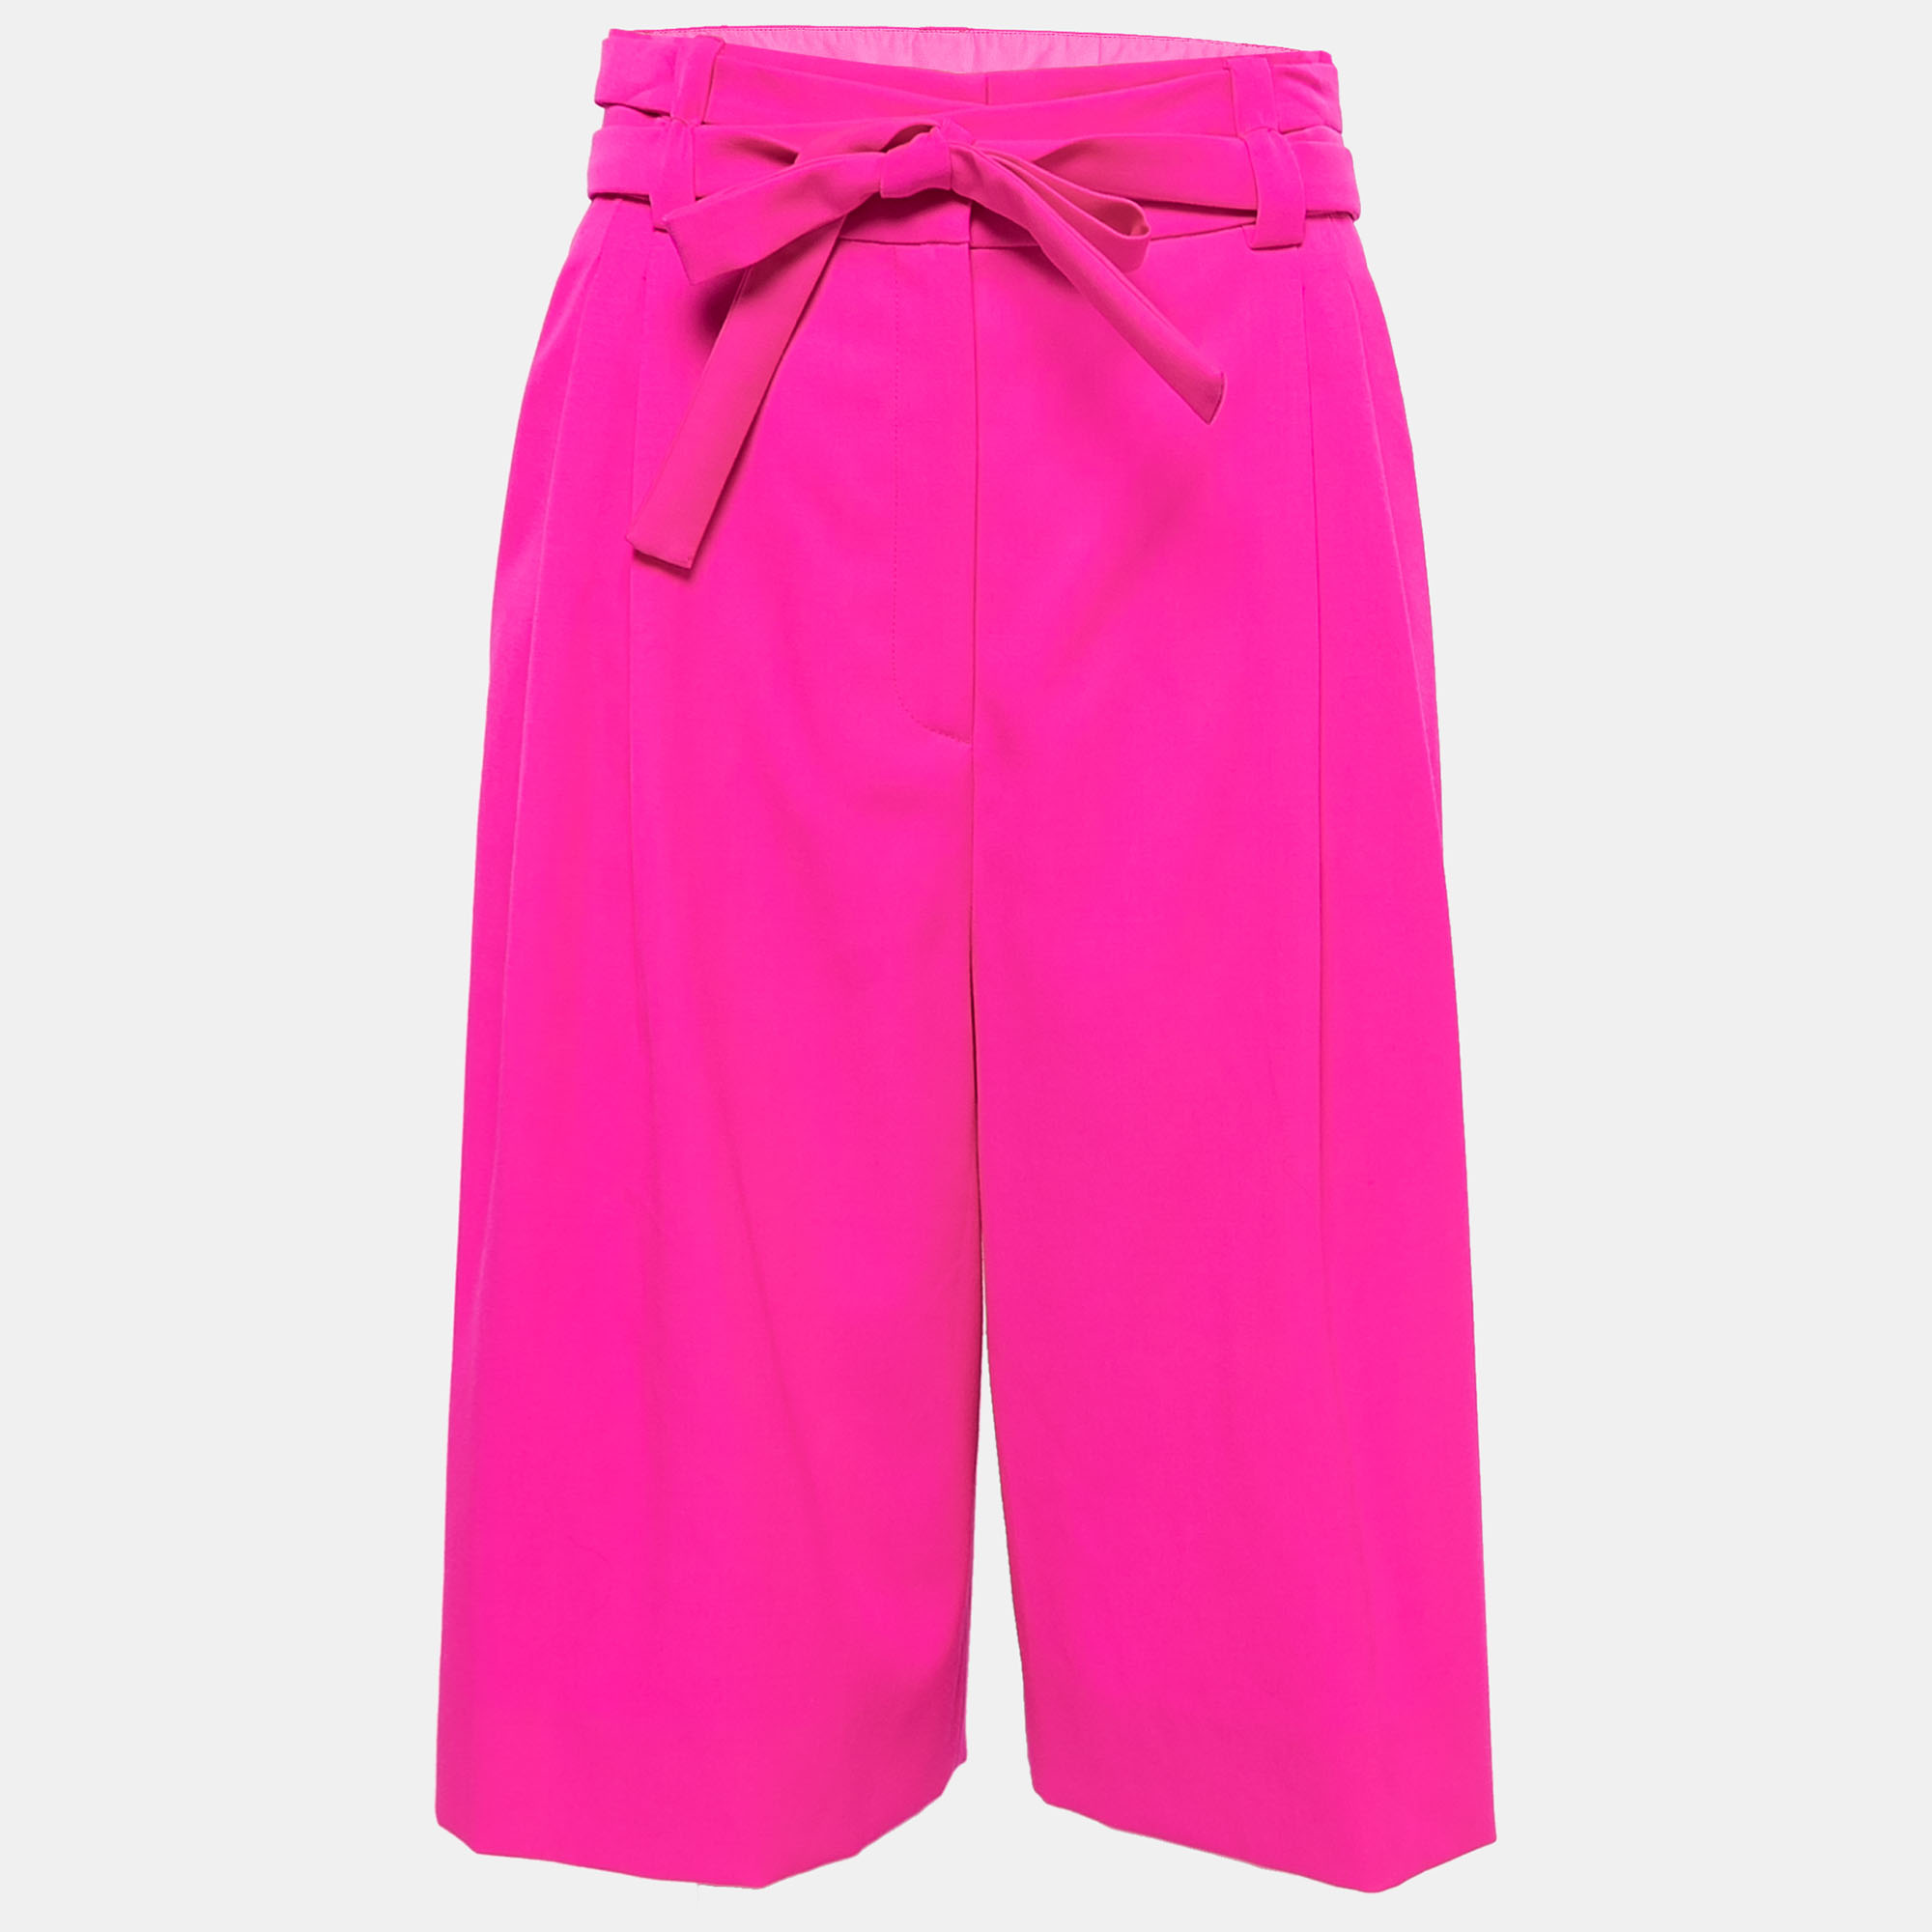 valentino pink shorts for women